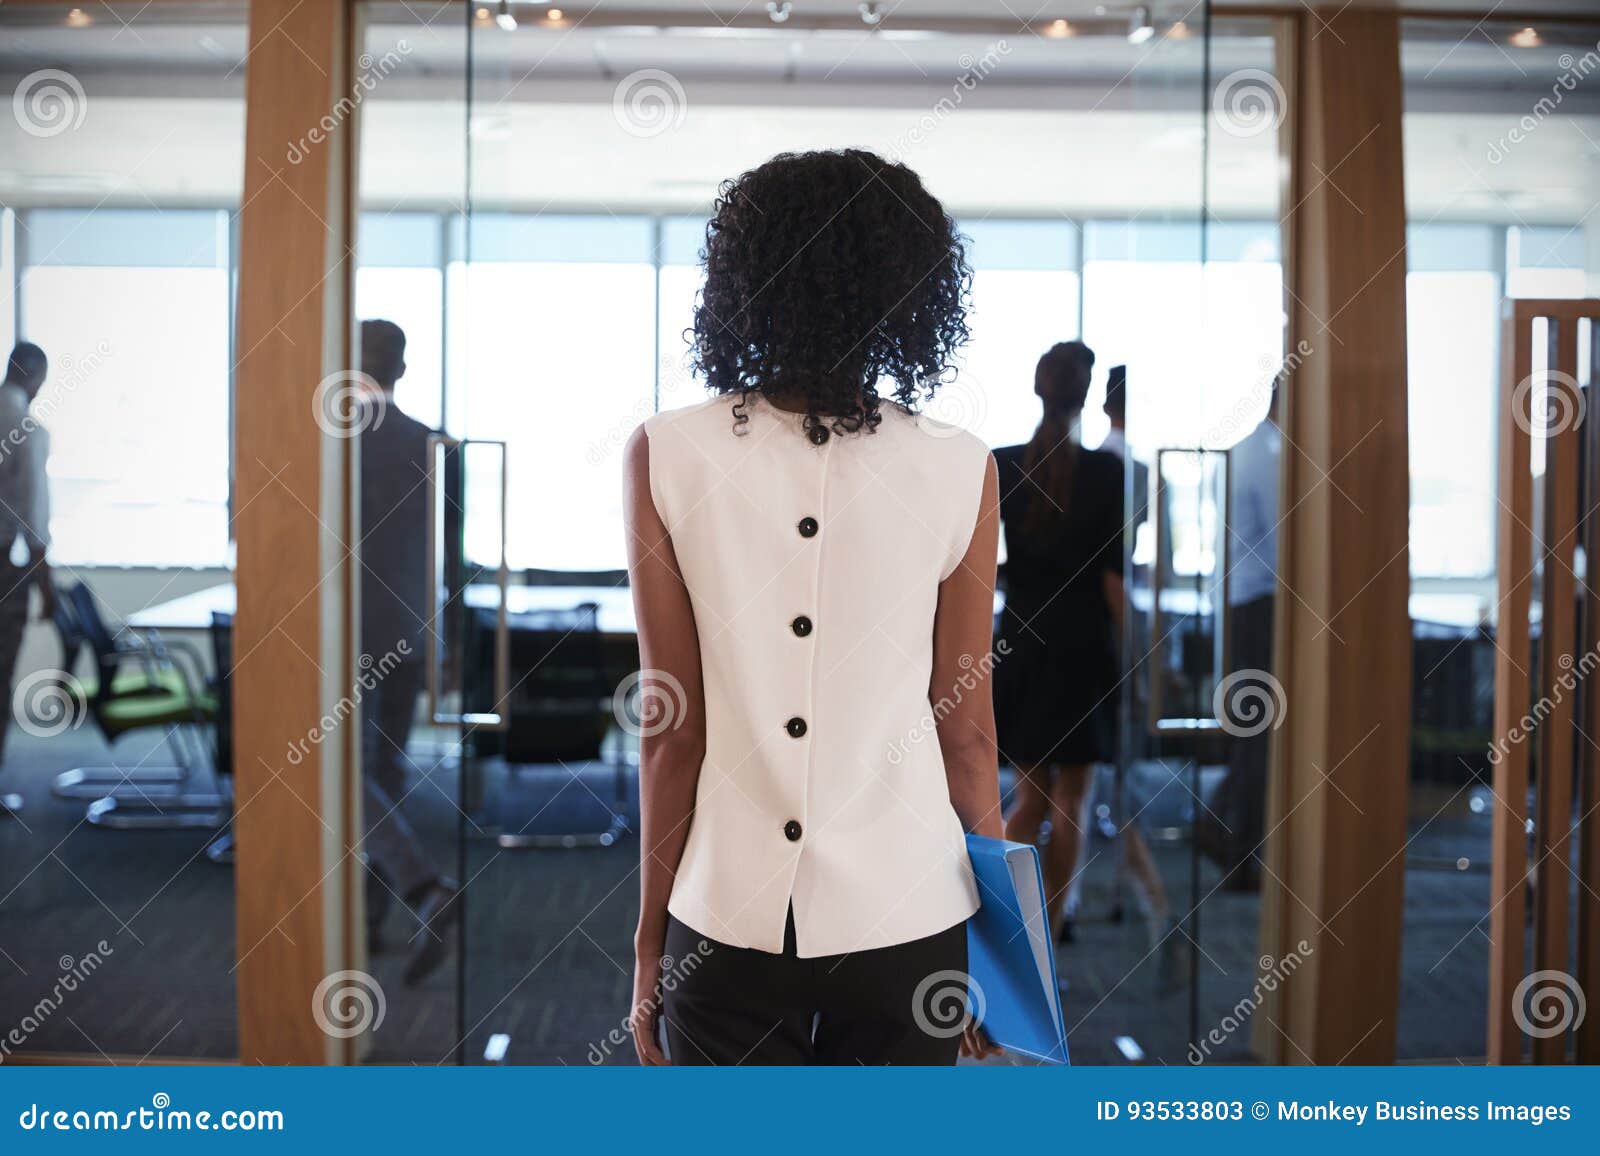 rear view of businesswoman entering boardroom for meeting